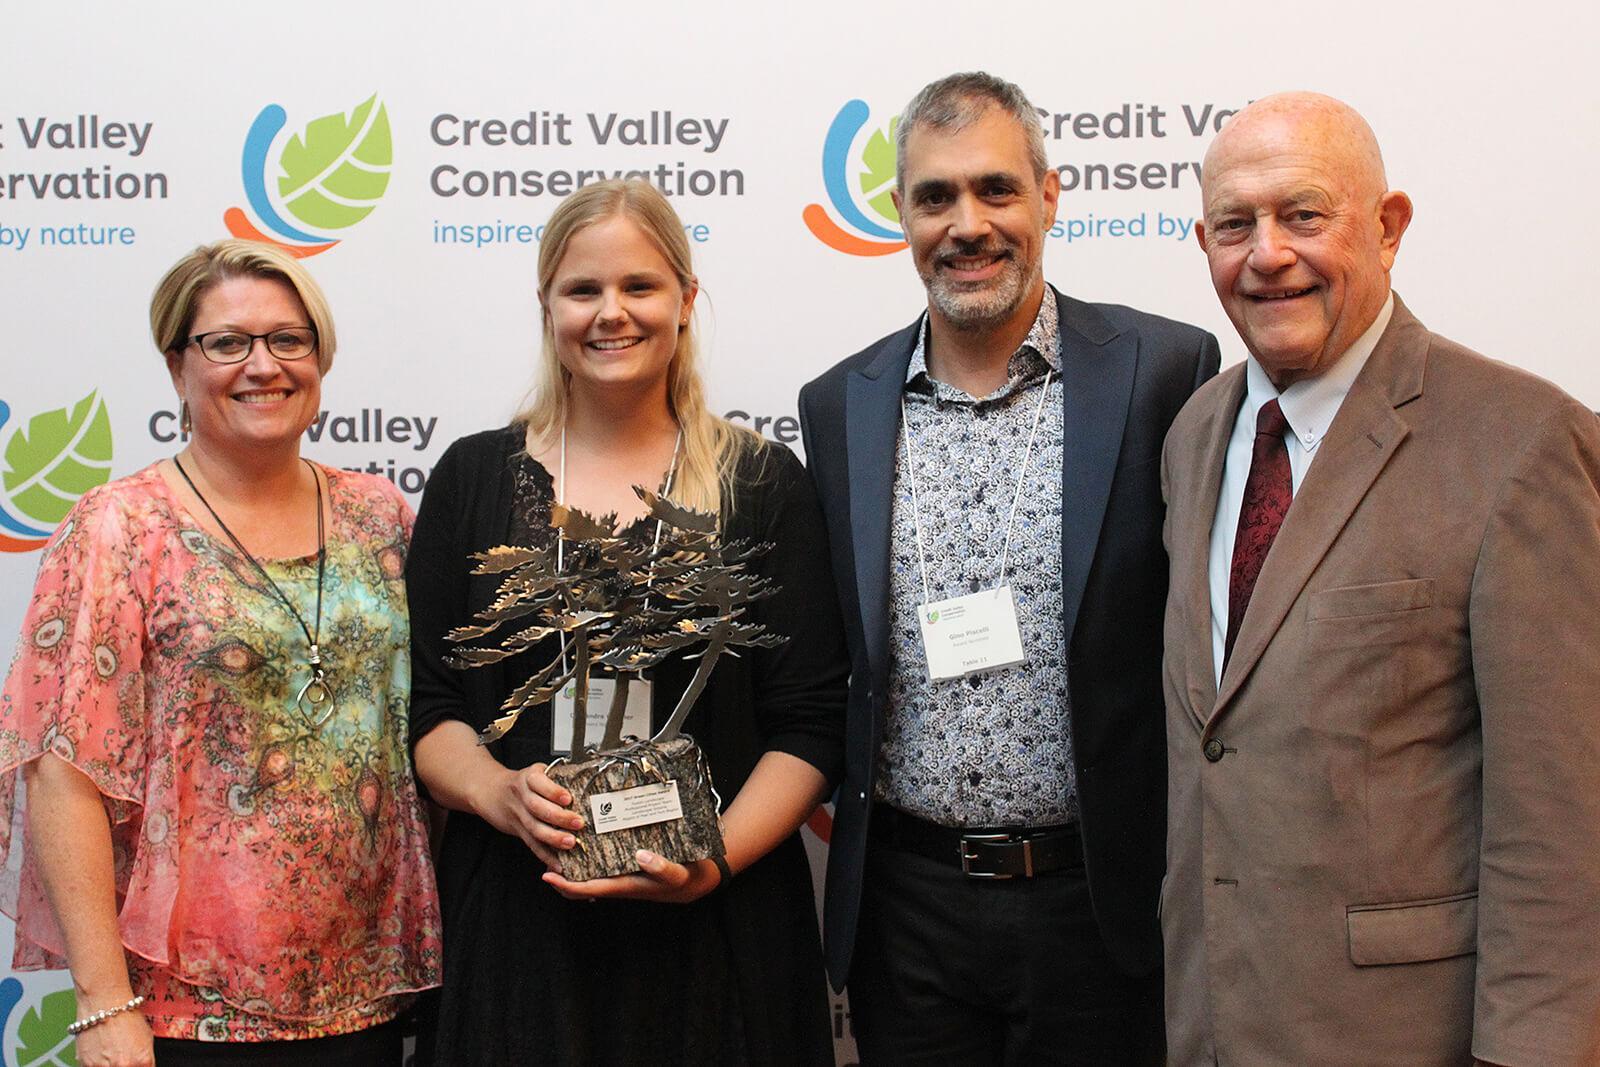 The Fusion Landscape Professional program was awarded the Green Cities Award at Credit Valley Conservation’s Friends of the Credit Conservation Awards on June 14, 2018. (L-R): Karen Ras, Councilor, Ward 2, Mississauga; Cassandra Wiesner, Landscape Ontario; Gino Piscelli, Region of Peel; Ron Starr, Councilor, Ward 6, Mississauga.